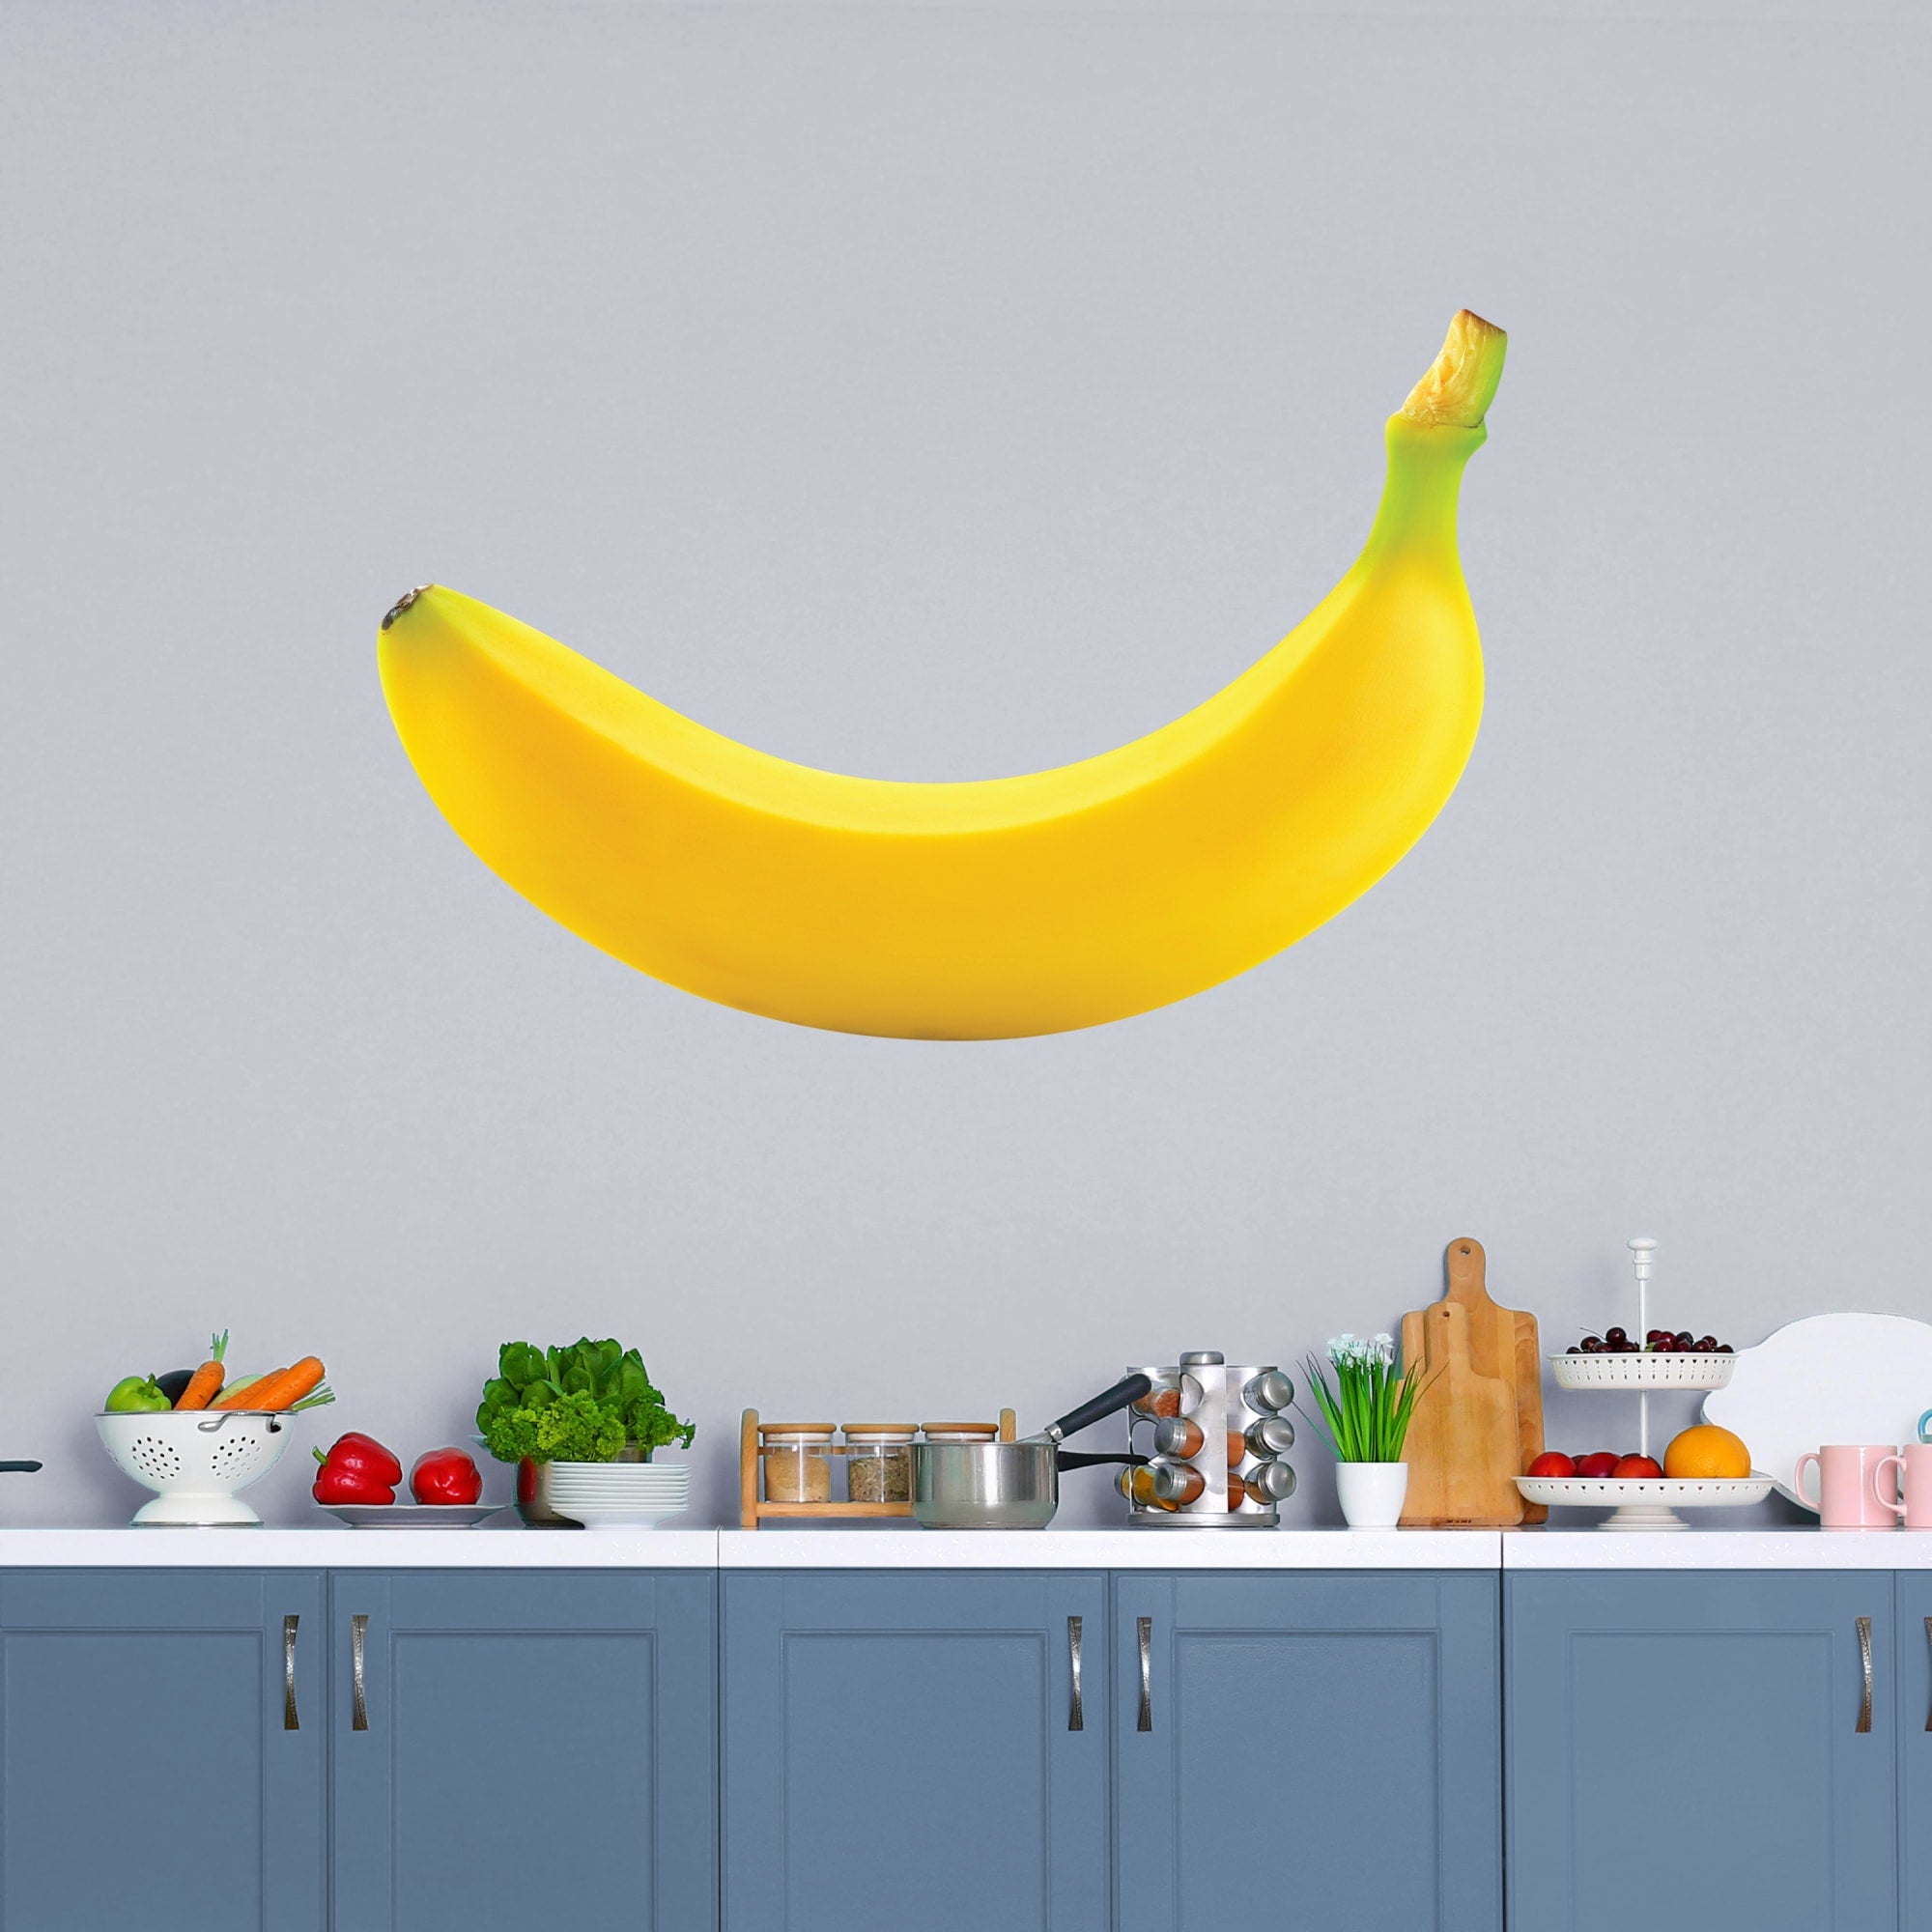 Banana - Removable Vinyl Decal Giant Banana + 2 Decals (50"W x 32"H) by Fathead